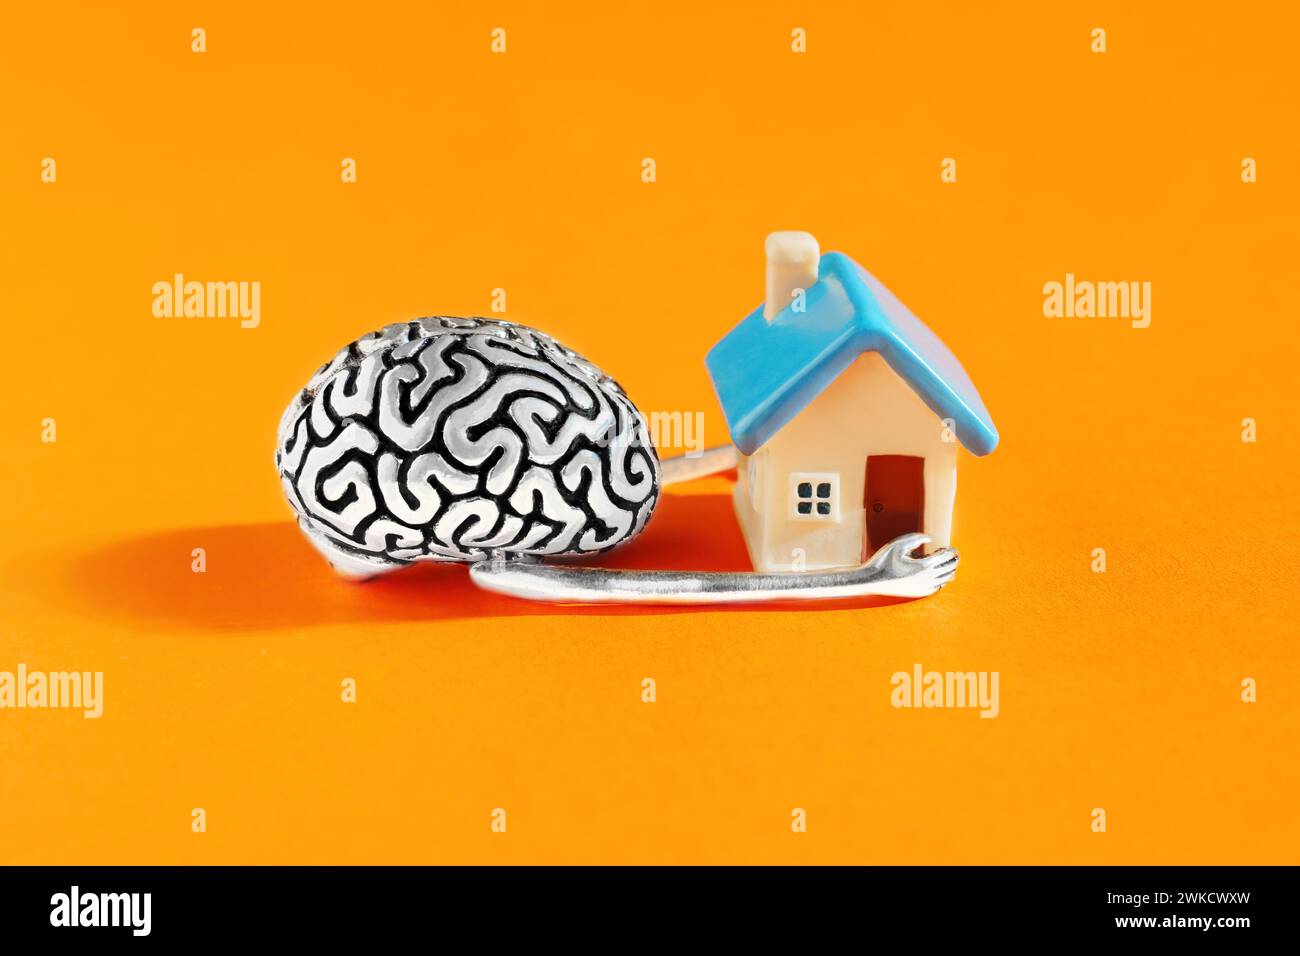 Steel human brain model tenderly cradling a miniature home in its hands against an orange backdrop. Inner world and mental well-being related concept. Stock Photo